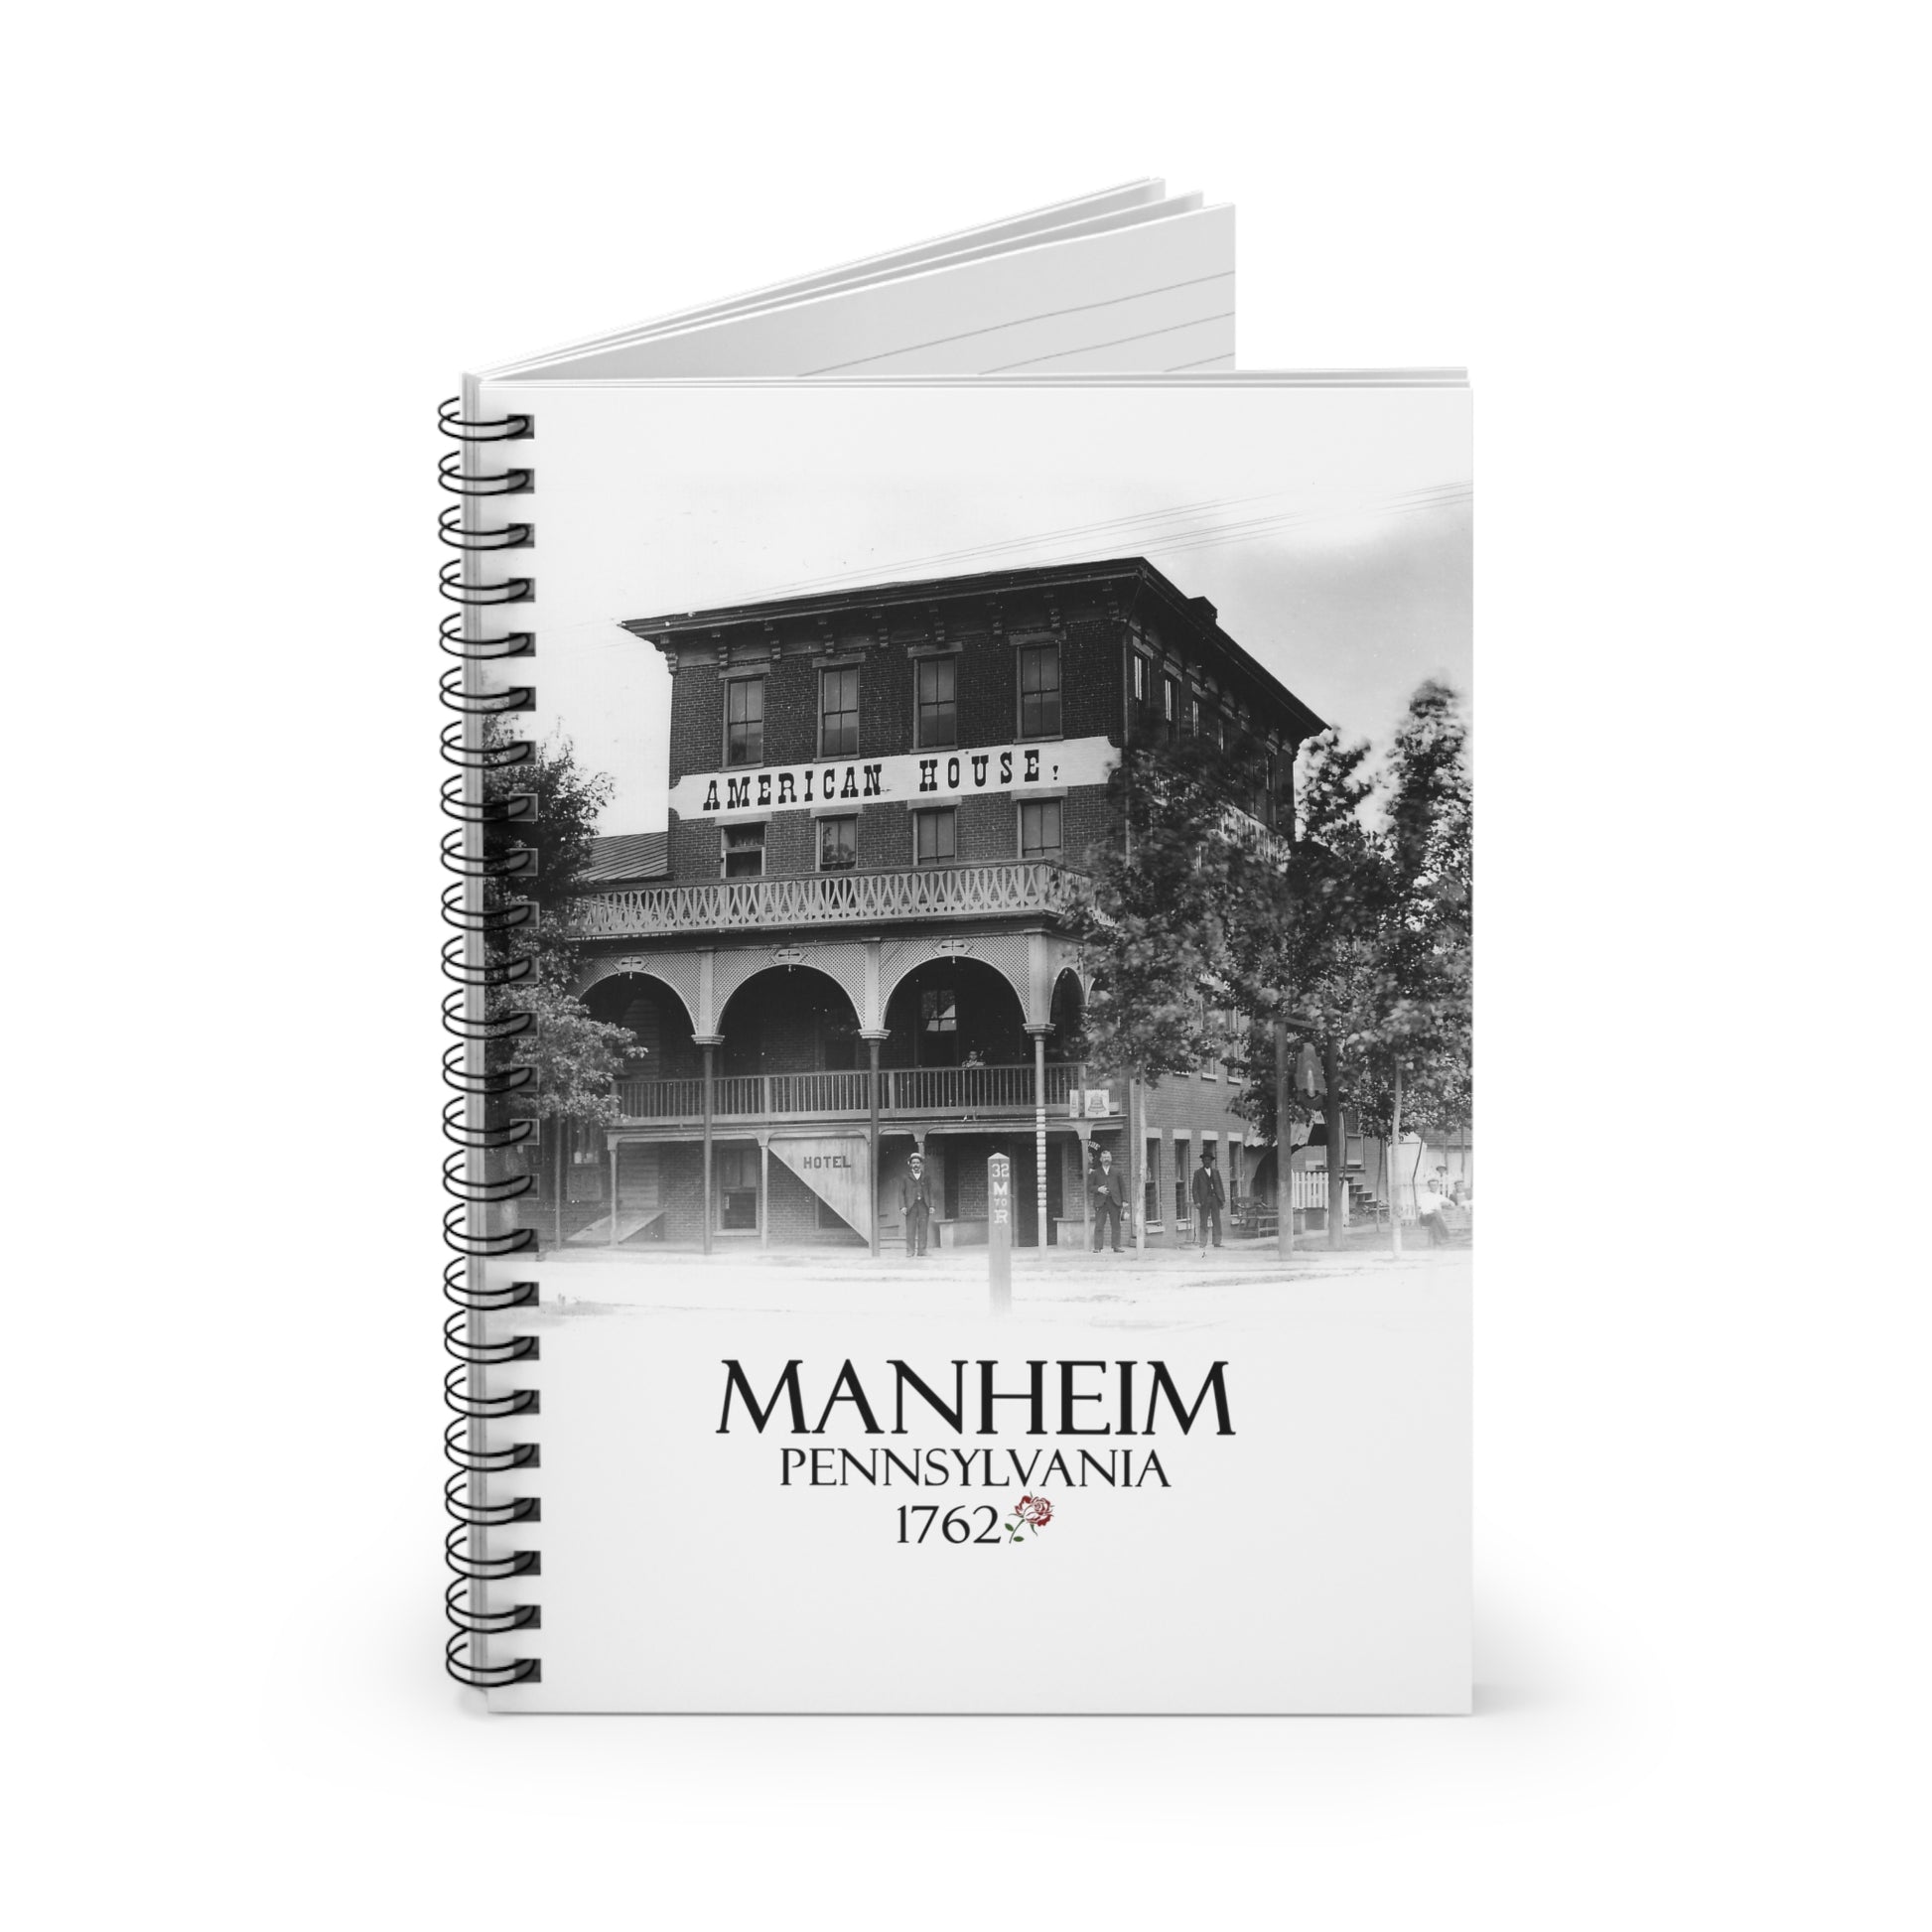 A notebook with an old historical photograph of the American House restaurant with the words "Manheim Pennsylvania 1762" at the bottom.